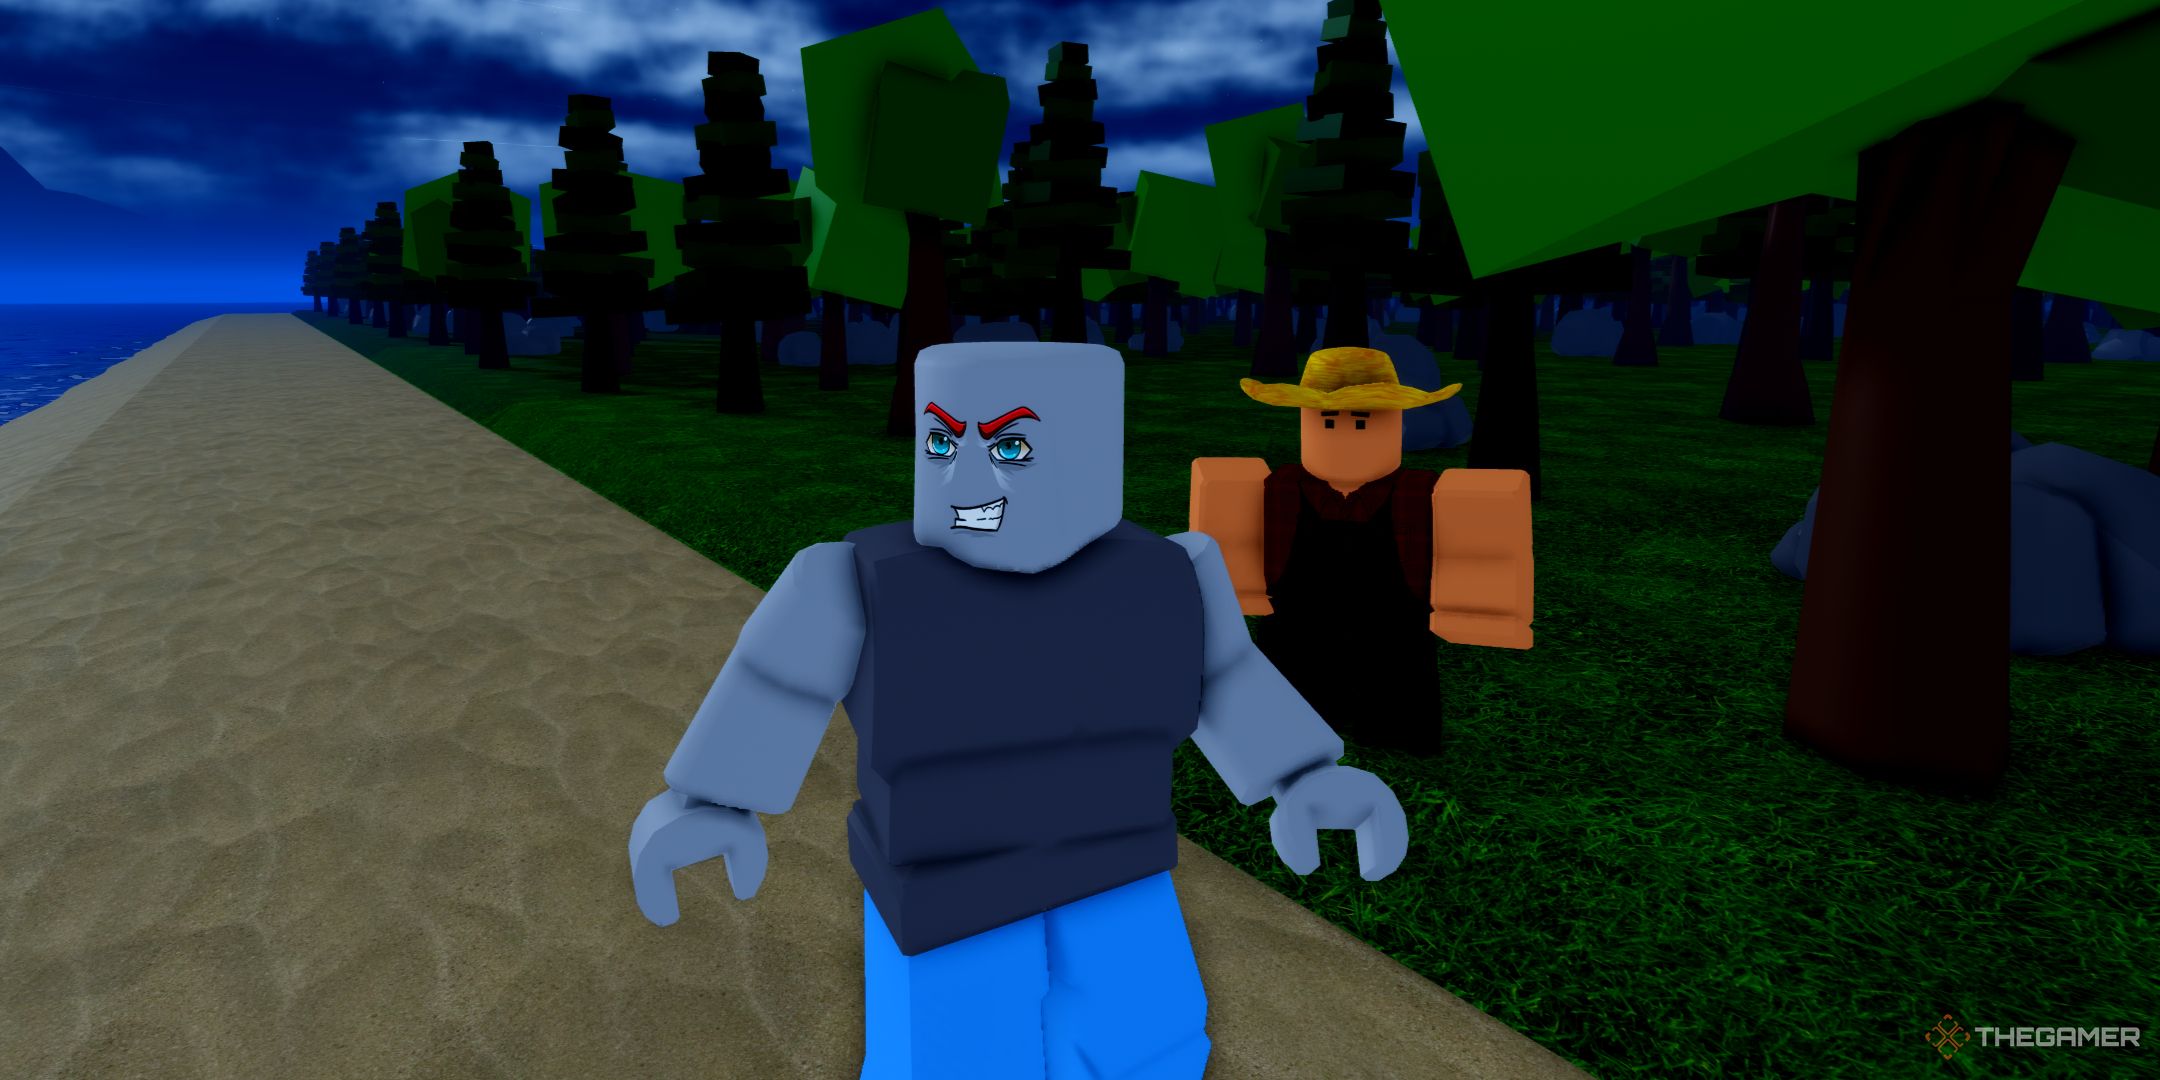 the farmer behind a player character in Kingdom Conquerors on Roblox